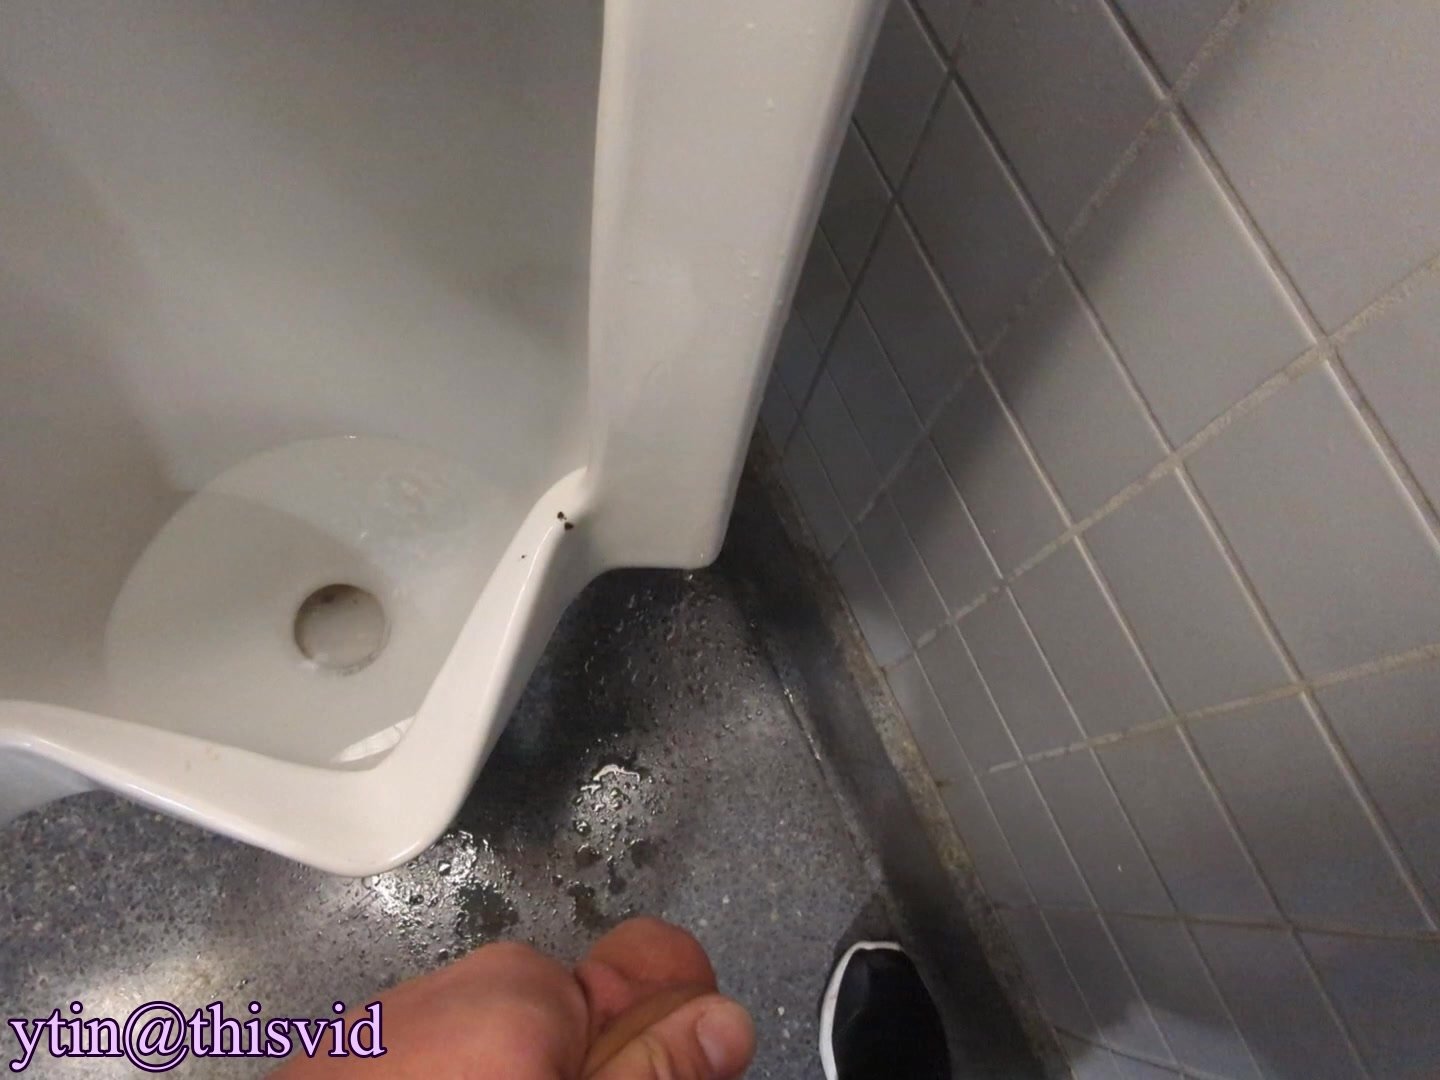 Piss on Floor Next to Urinal with People Present